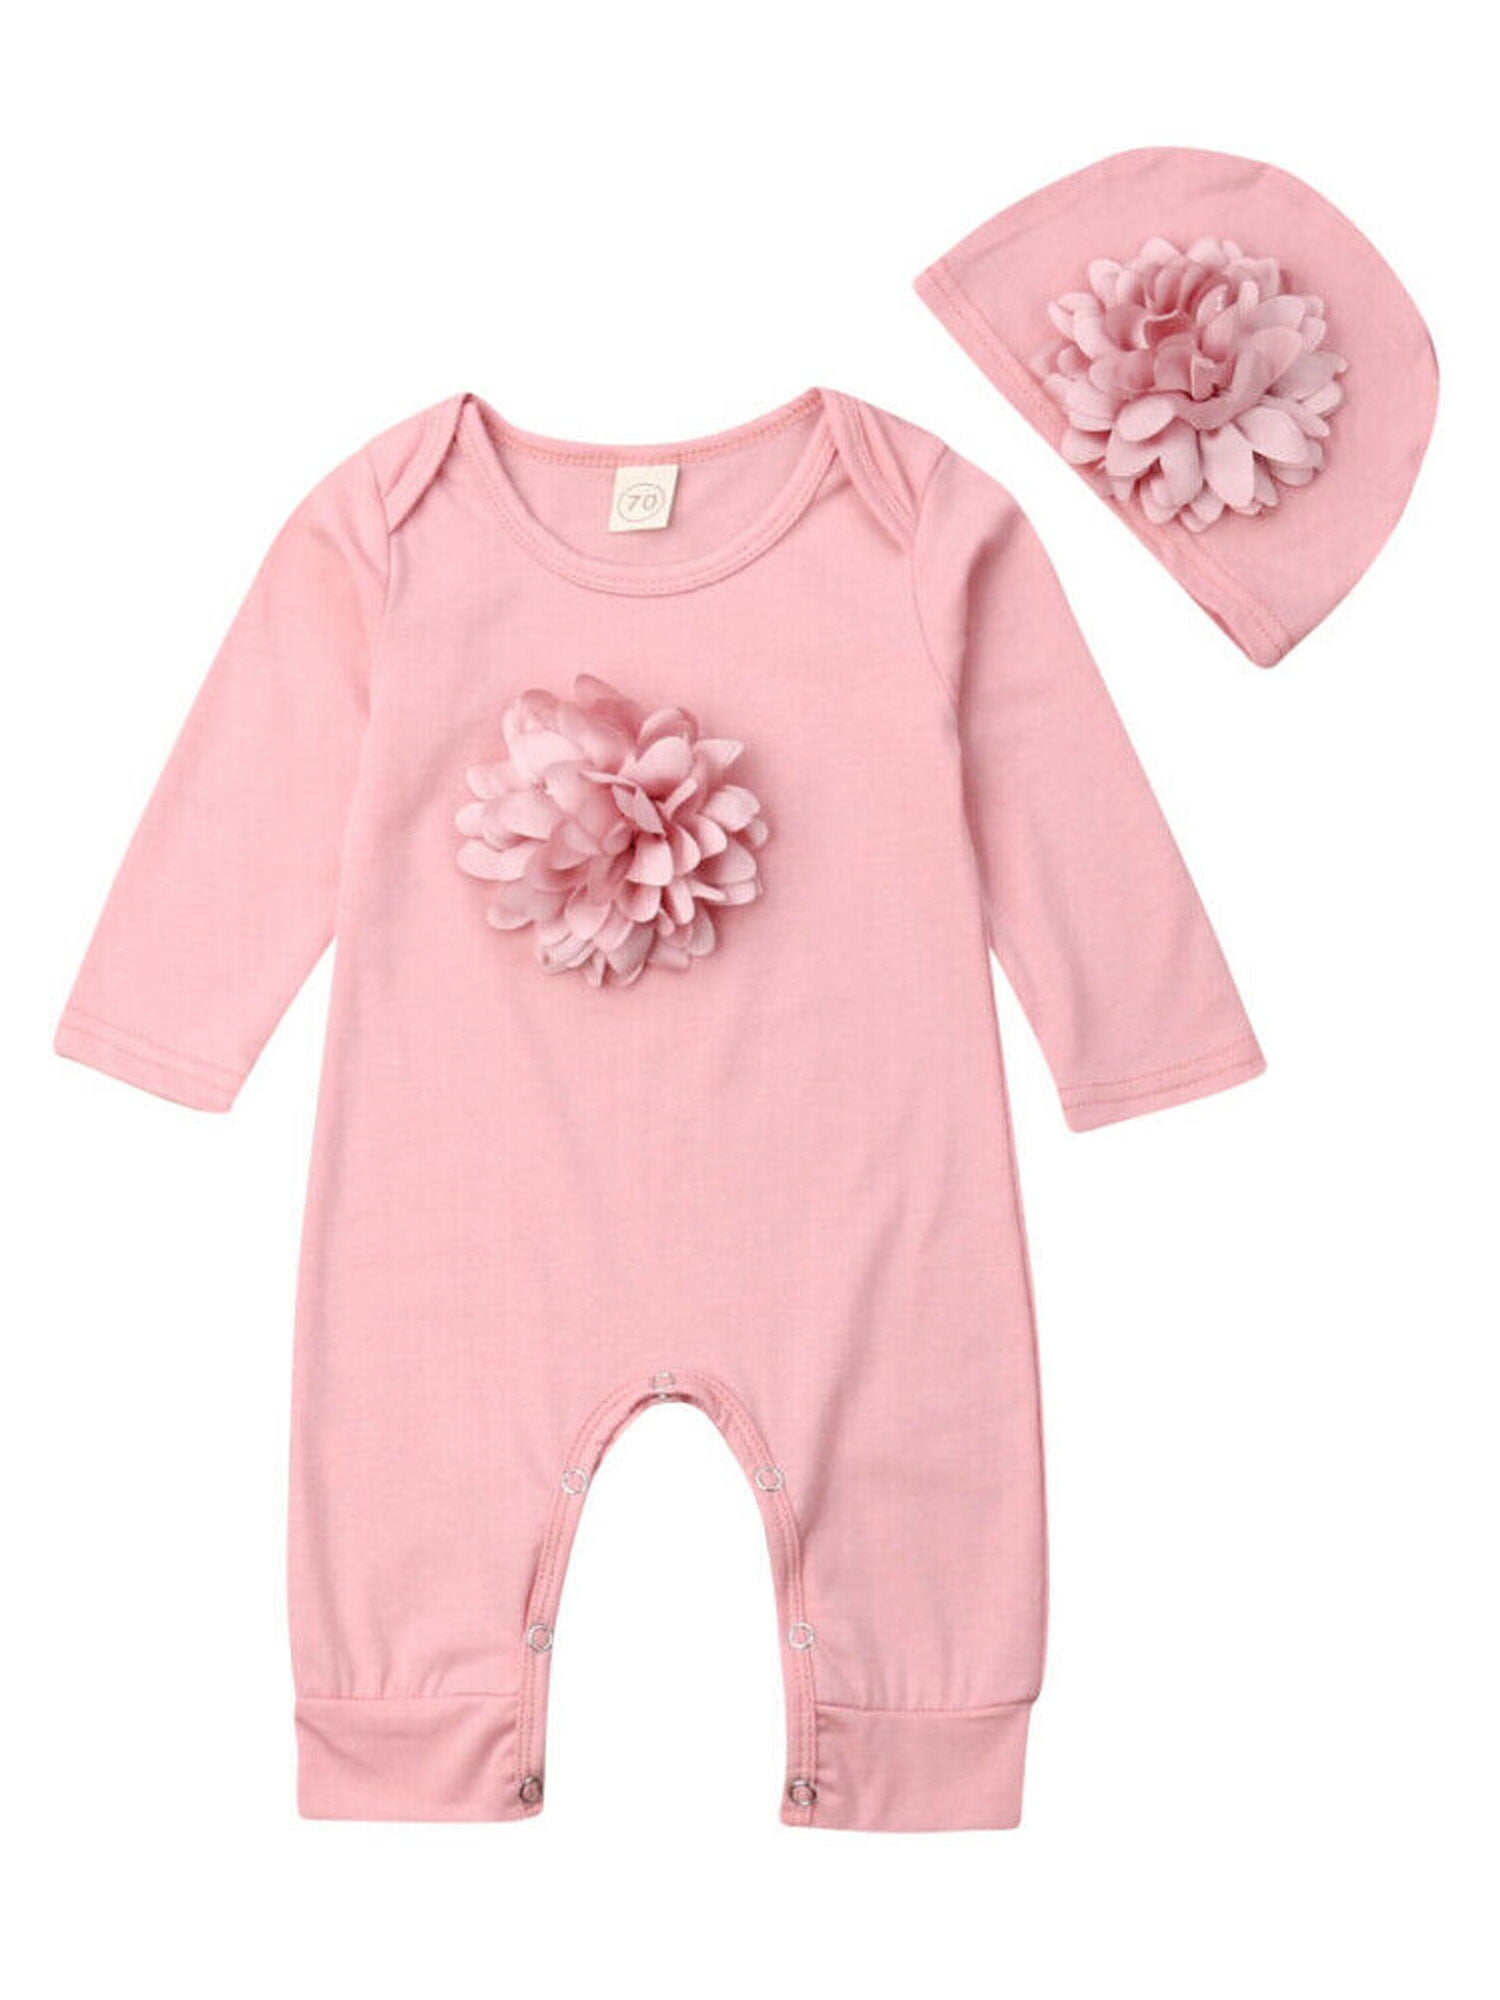 Baby Girls Sleepsuit Hat All in One 2 Piece Set Clothes Outfit Flowers Cutie Pie 